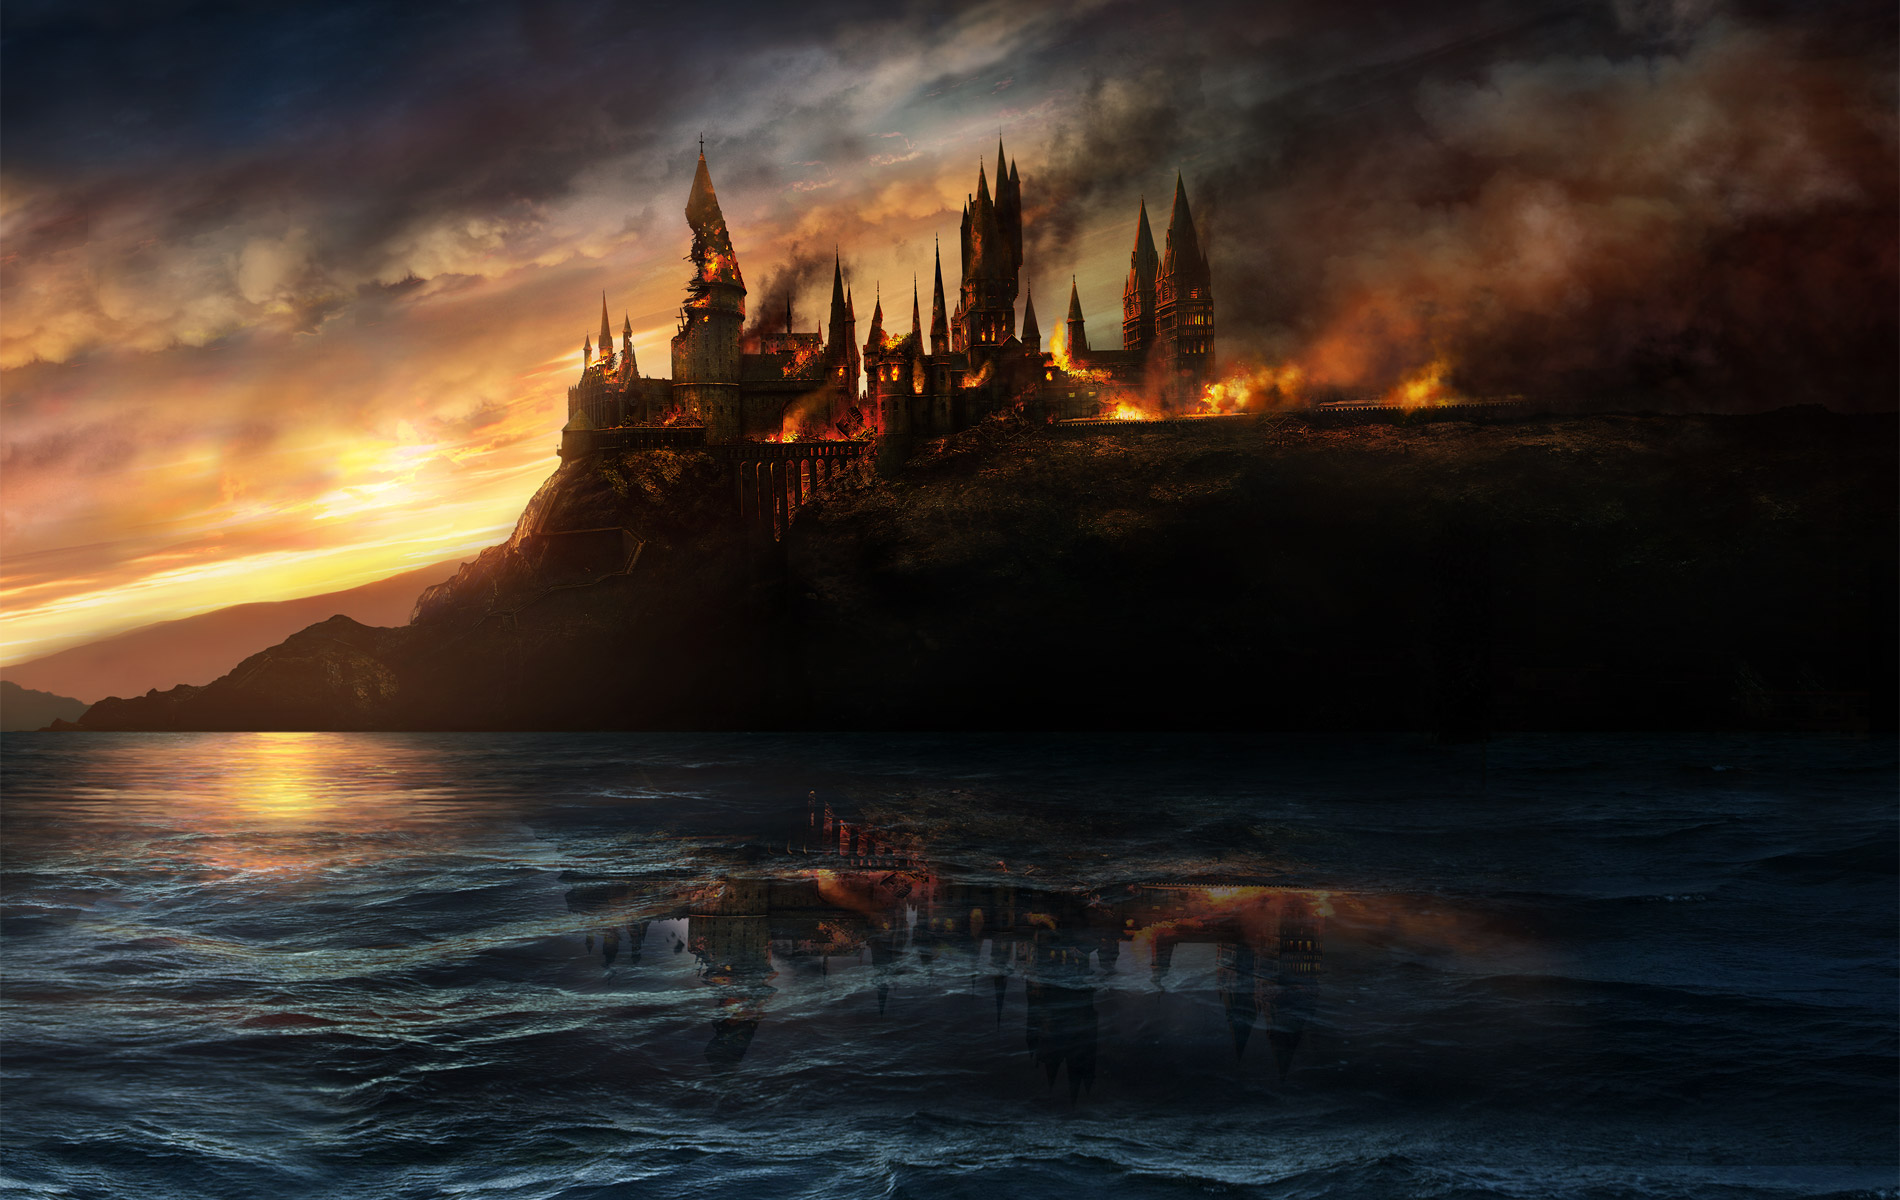 The Harry Potter Movies: The Triumphant Battle of the Battle of Hogwarts 2